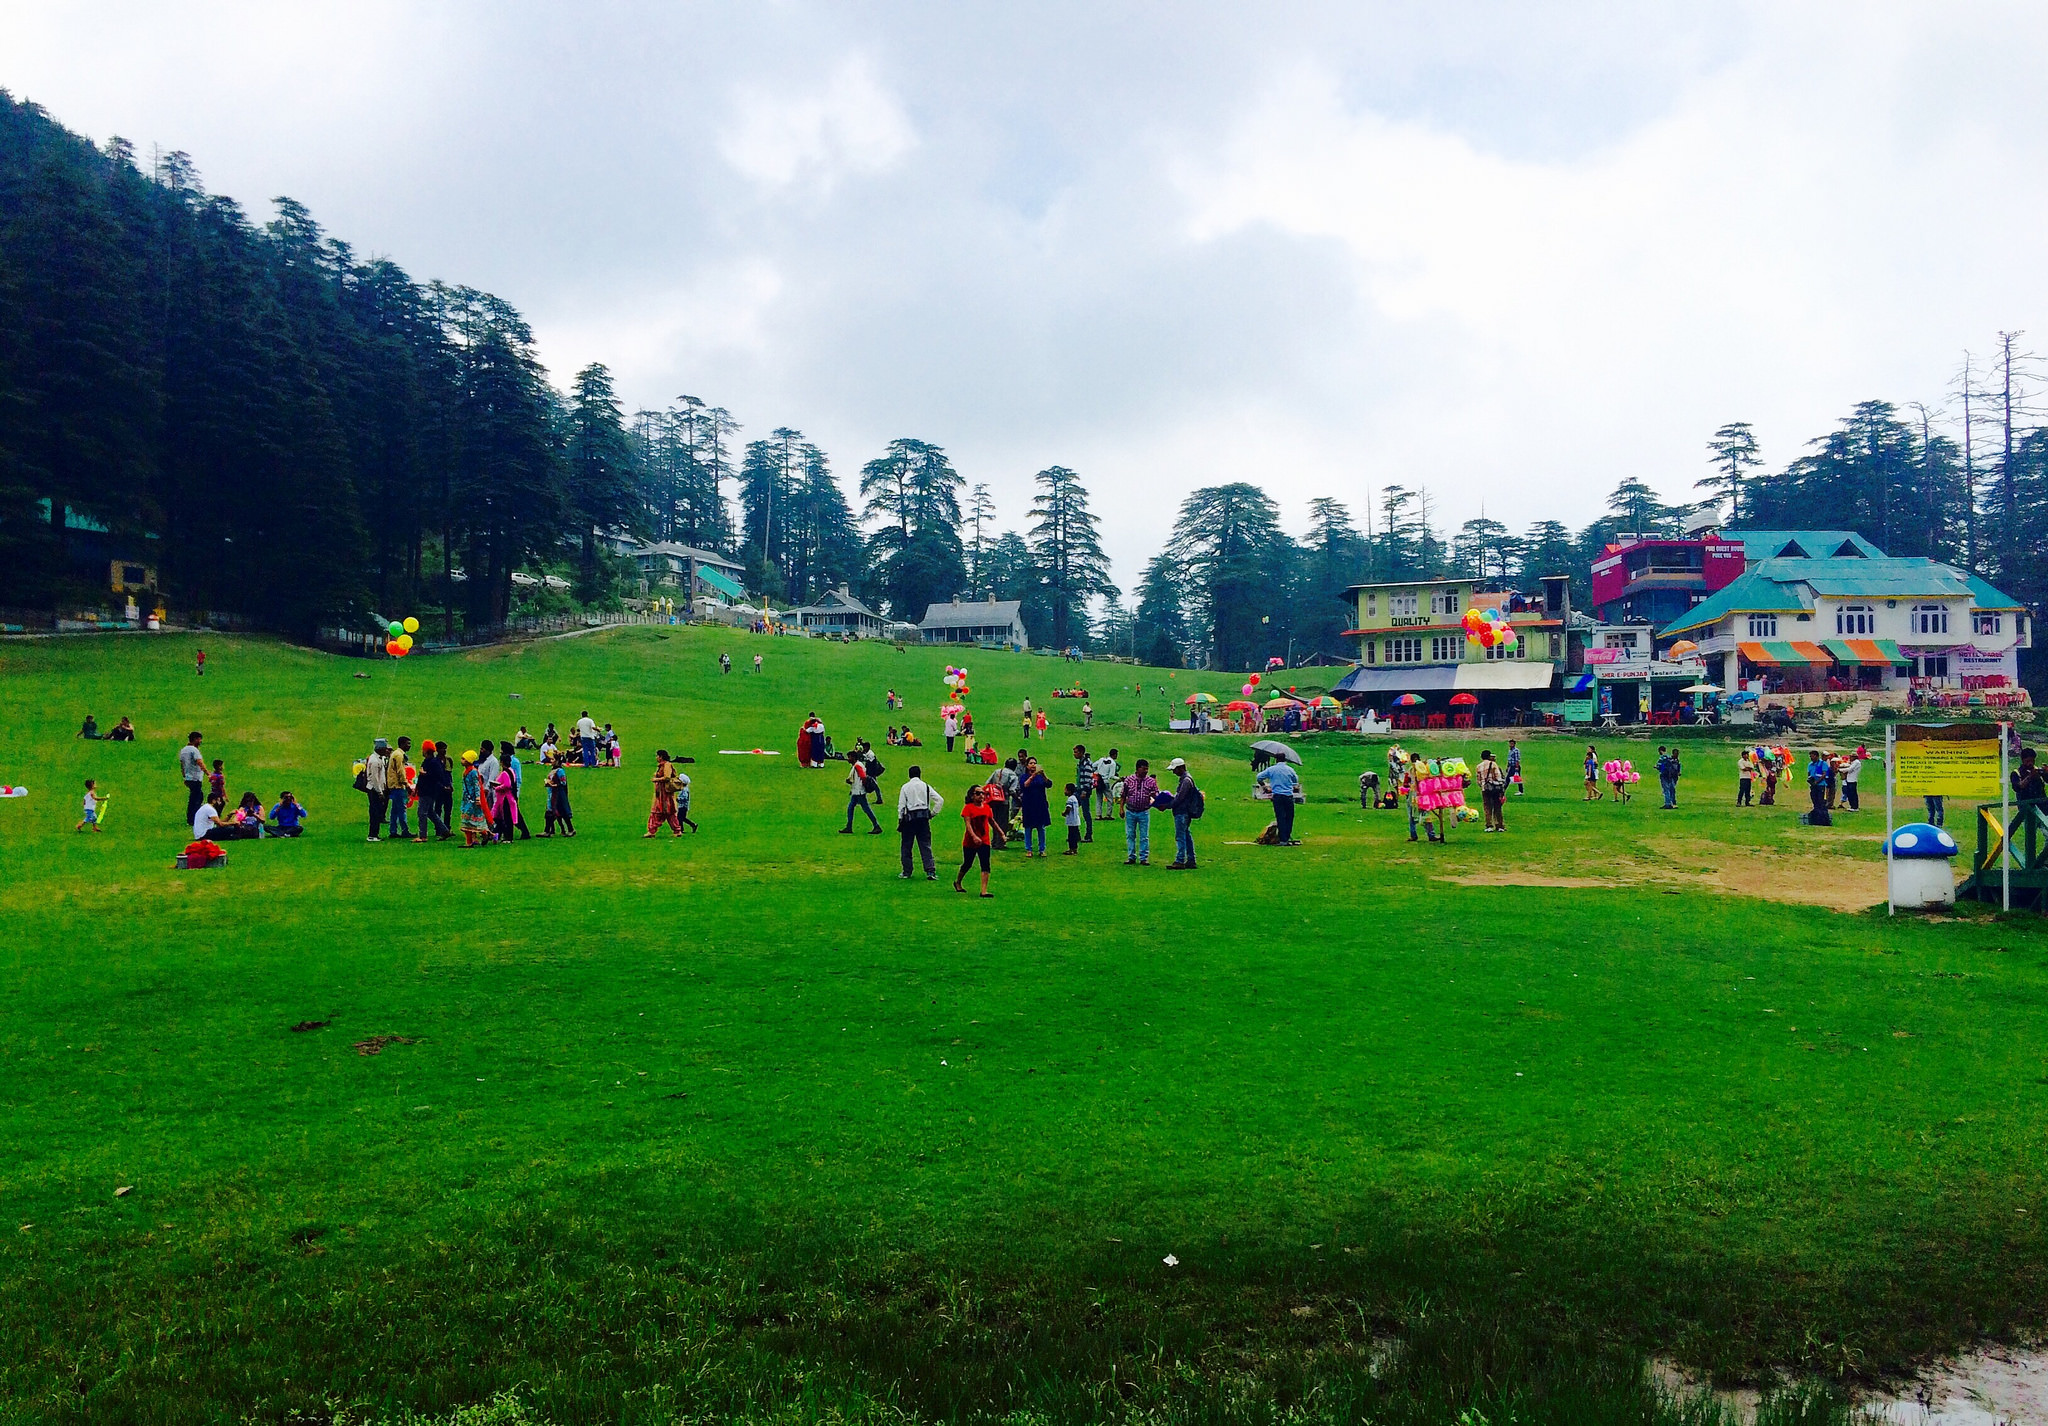 dharamshala dalhousie tour package from chandigarh